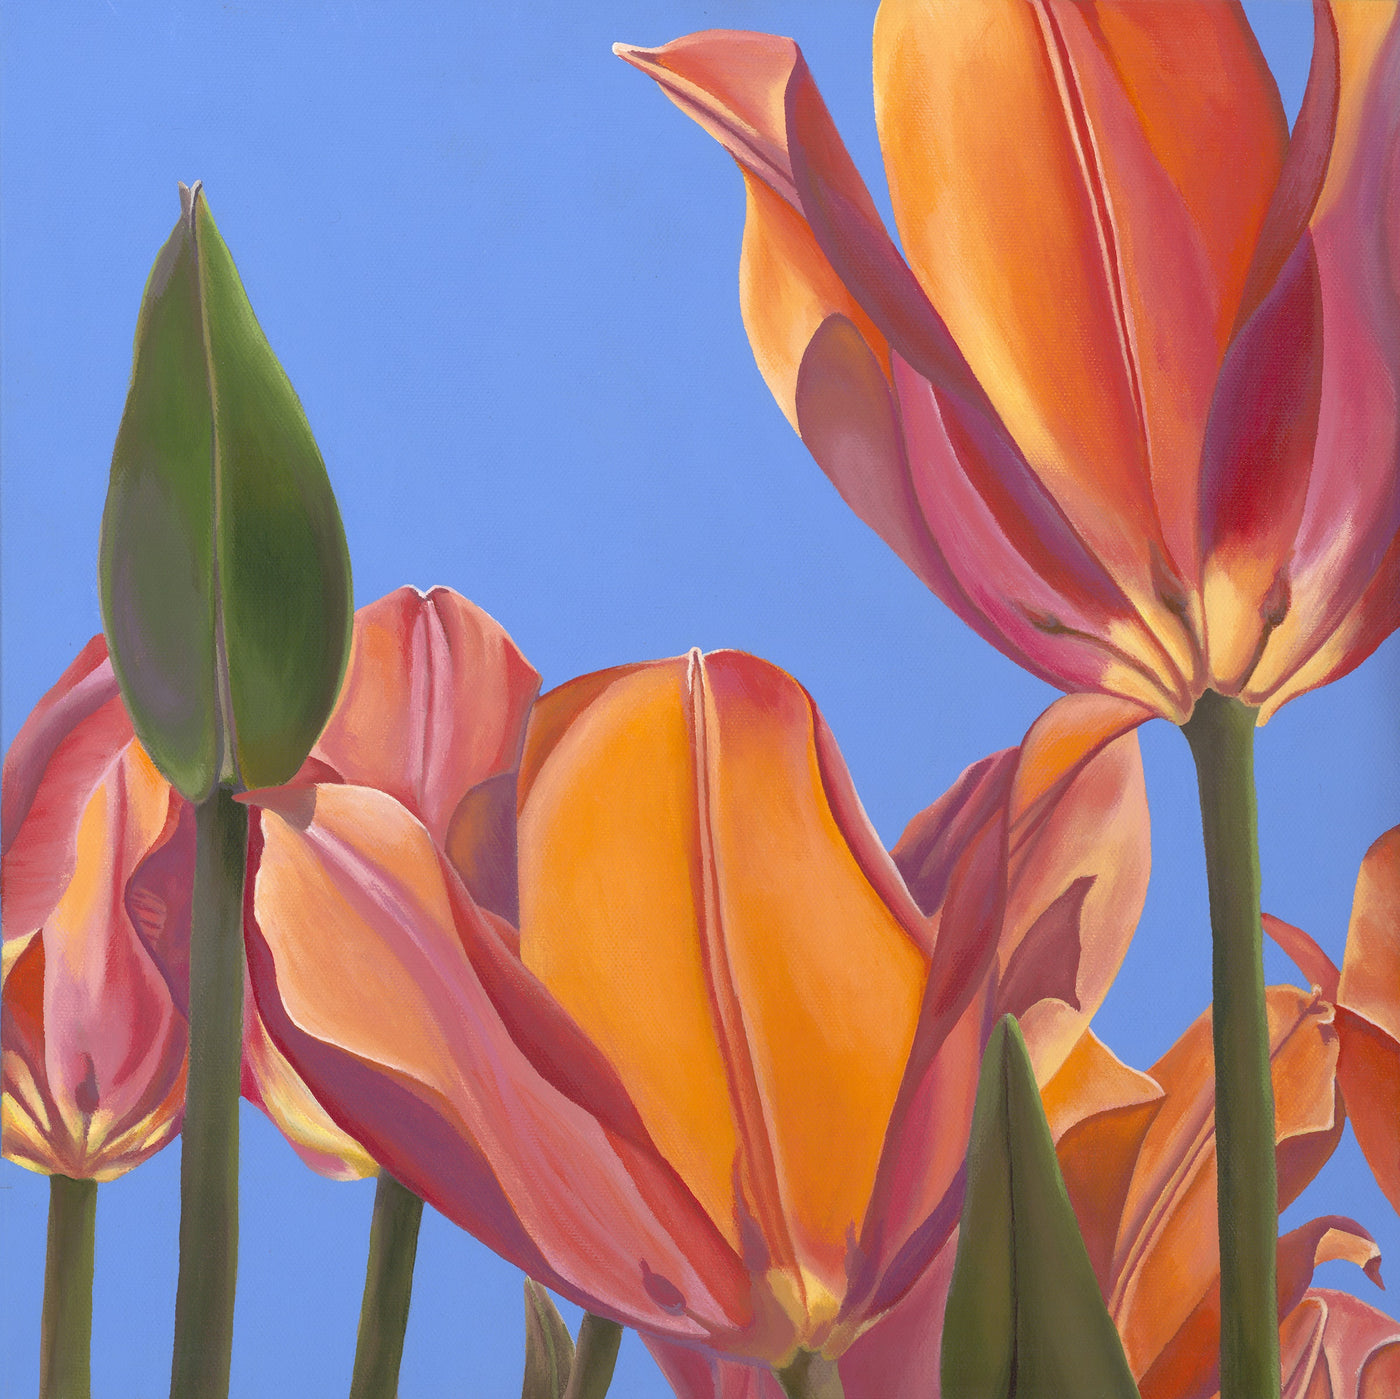 Renée Switkes' tulips painting, "Tulips; Rise with Enthusiasm" is available at Voss Gallery, San Francisco for $900.